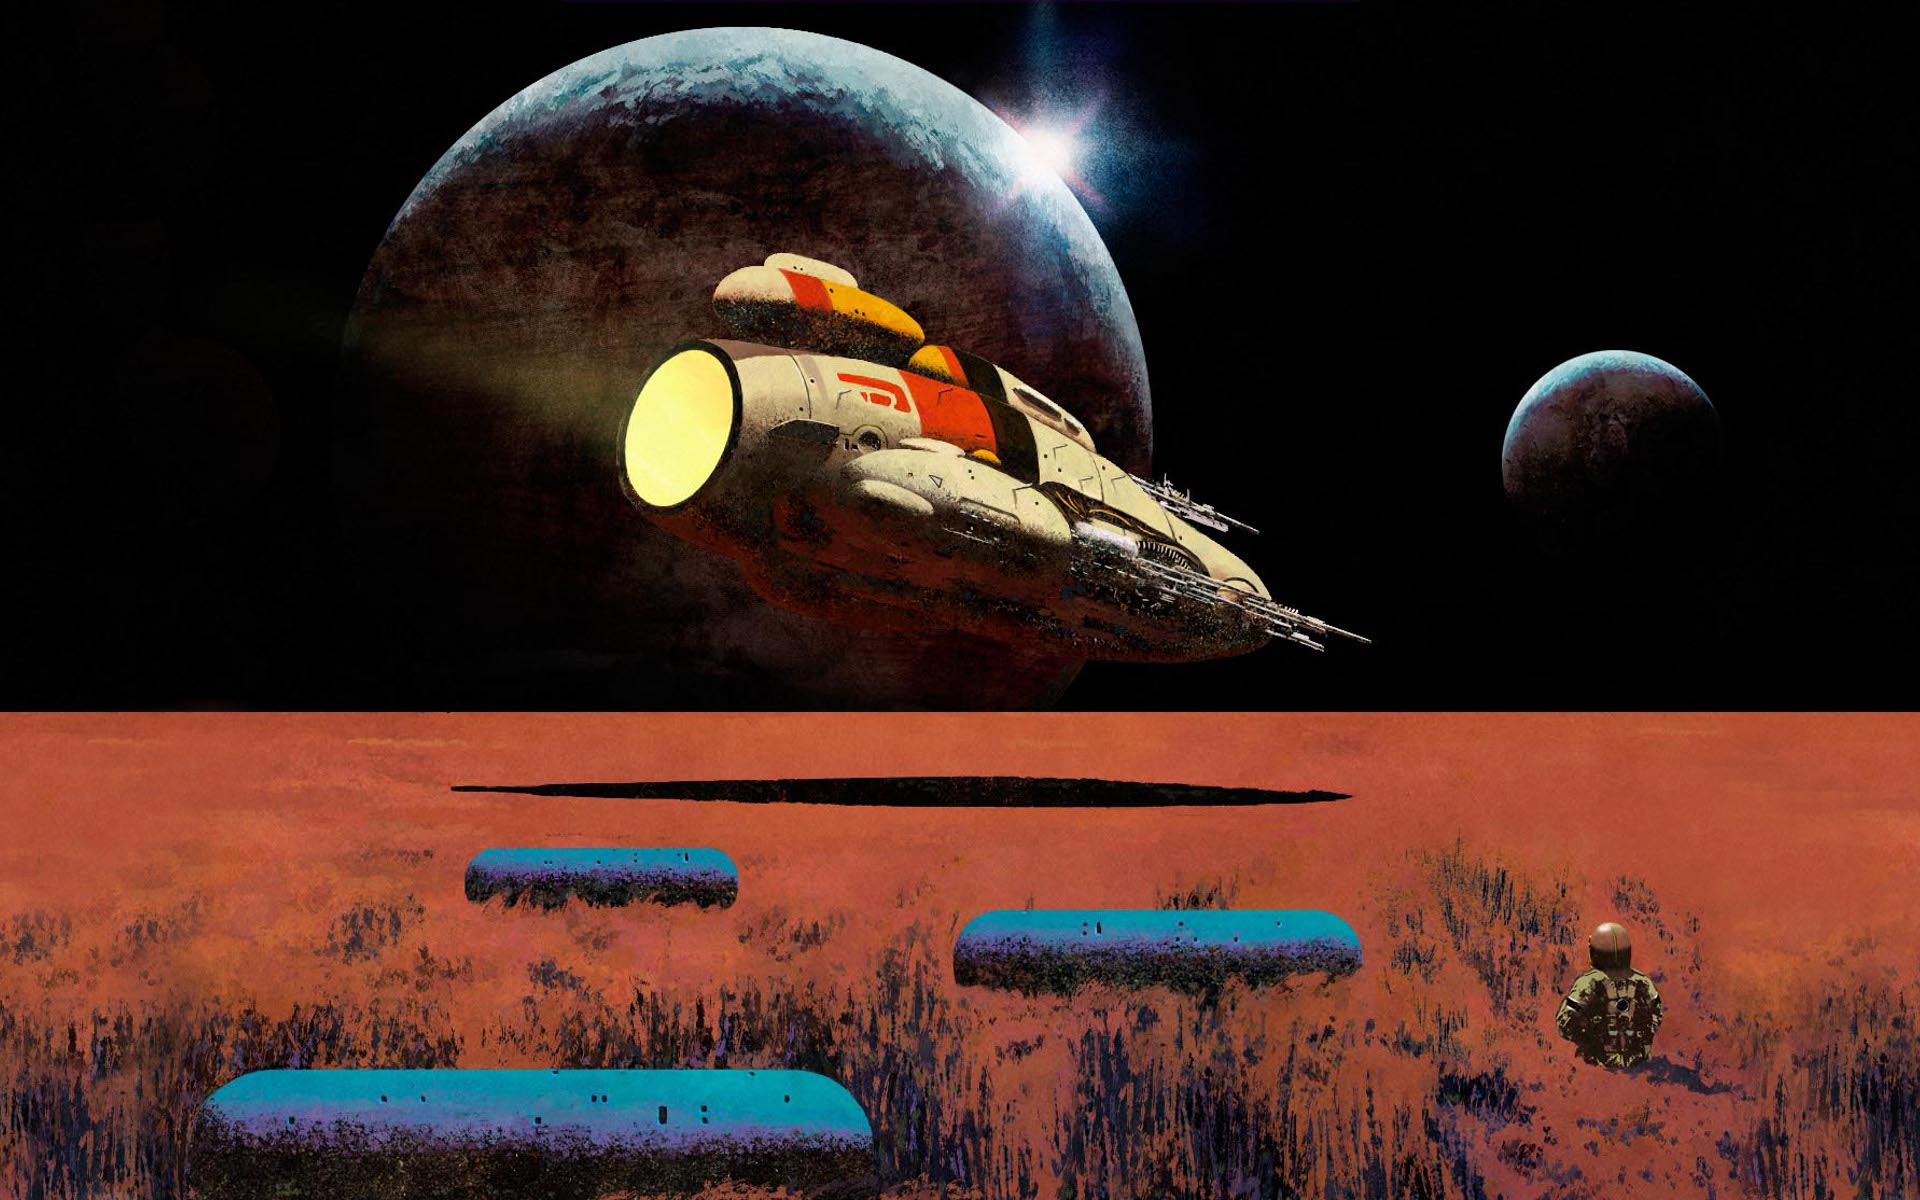 Artwork Painting Science Fiction Space Robot Ship Planet 1920x1200